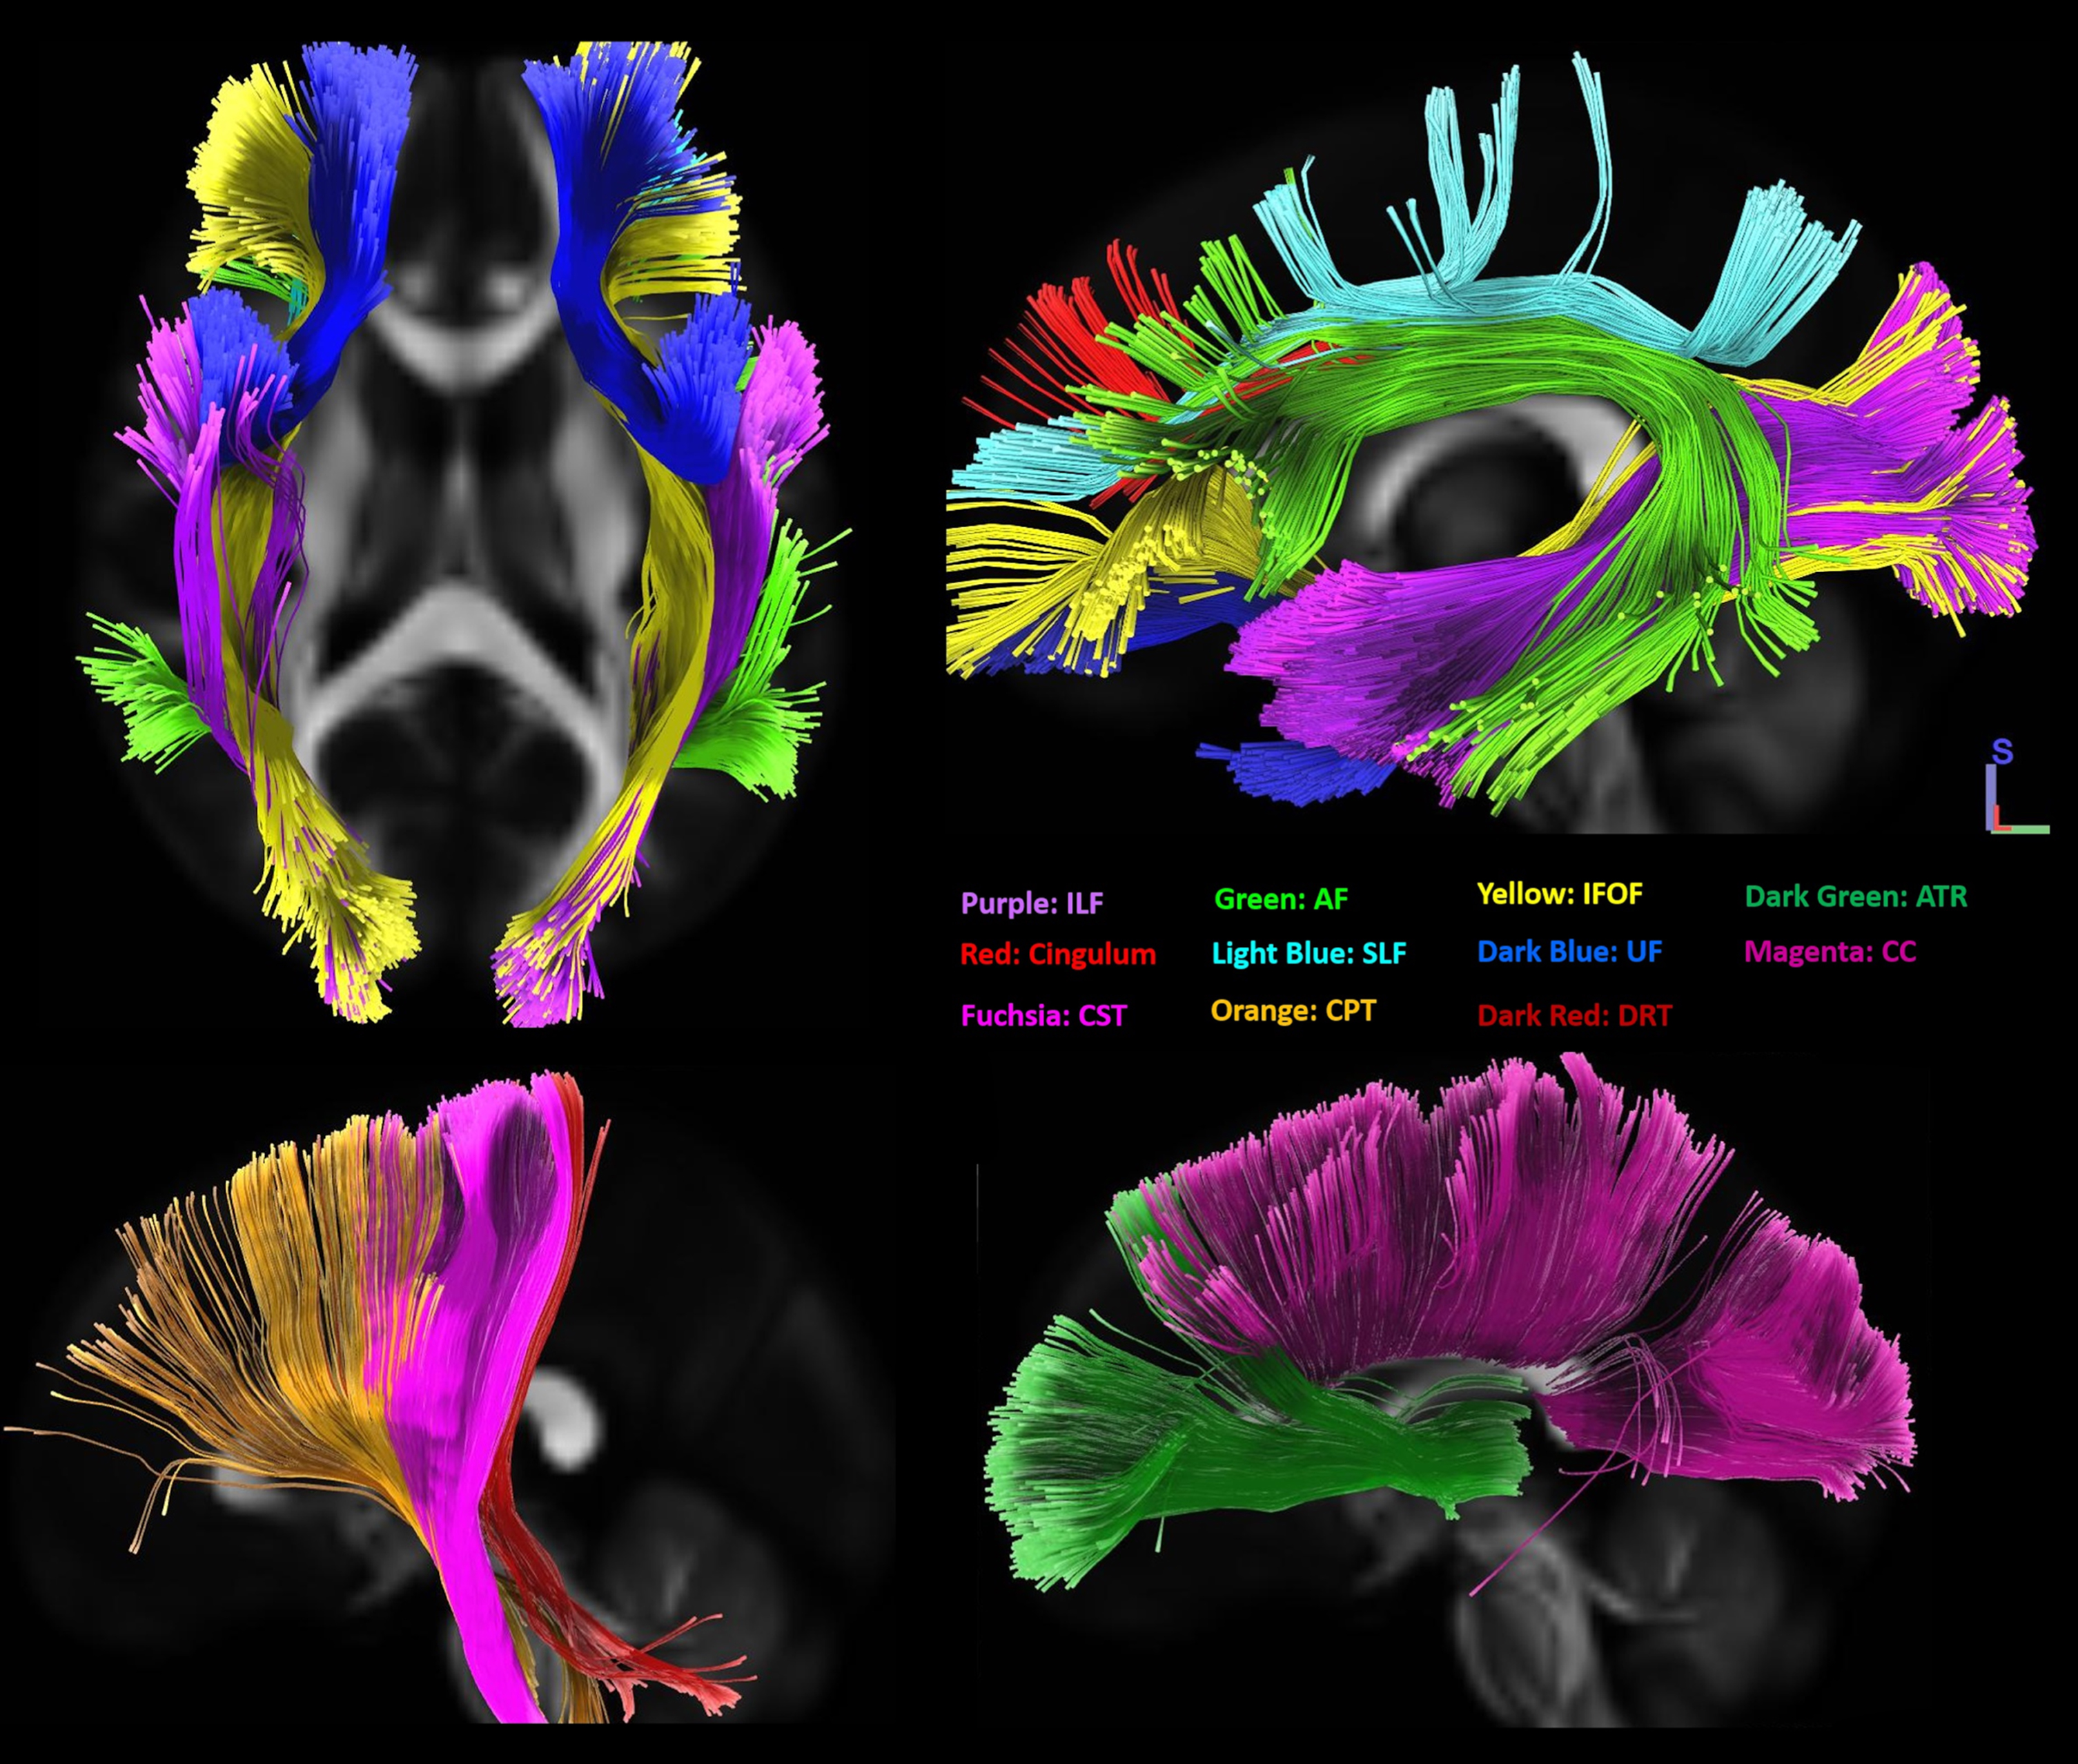 Overview of all significant white matter tracts from the correlational tractography models. ILF, inferior longitudinal fasciculus; AF, arcuate fasciculus; IFOF, inferior frontooccipital fasciculus; ATR, anterior thalamic radiation; SLF, superior longitudinal fasciculus; UF, uncinated fasciculus; CC, corpus callosum; CST, corticospinal tract; CPT, corticopontine tract; DRT, dentatorubrothalamic tract; RST, reticulospinal tract.